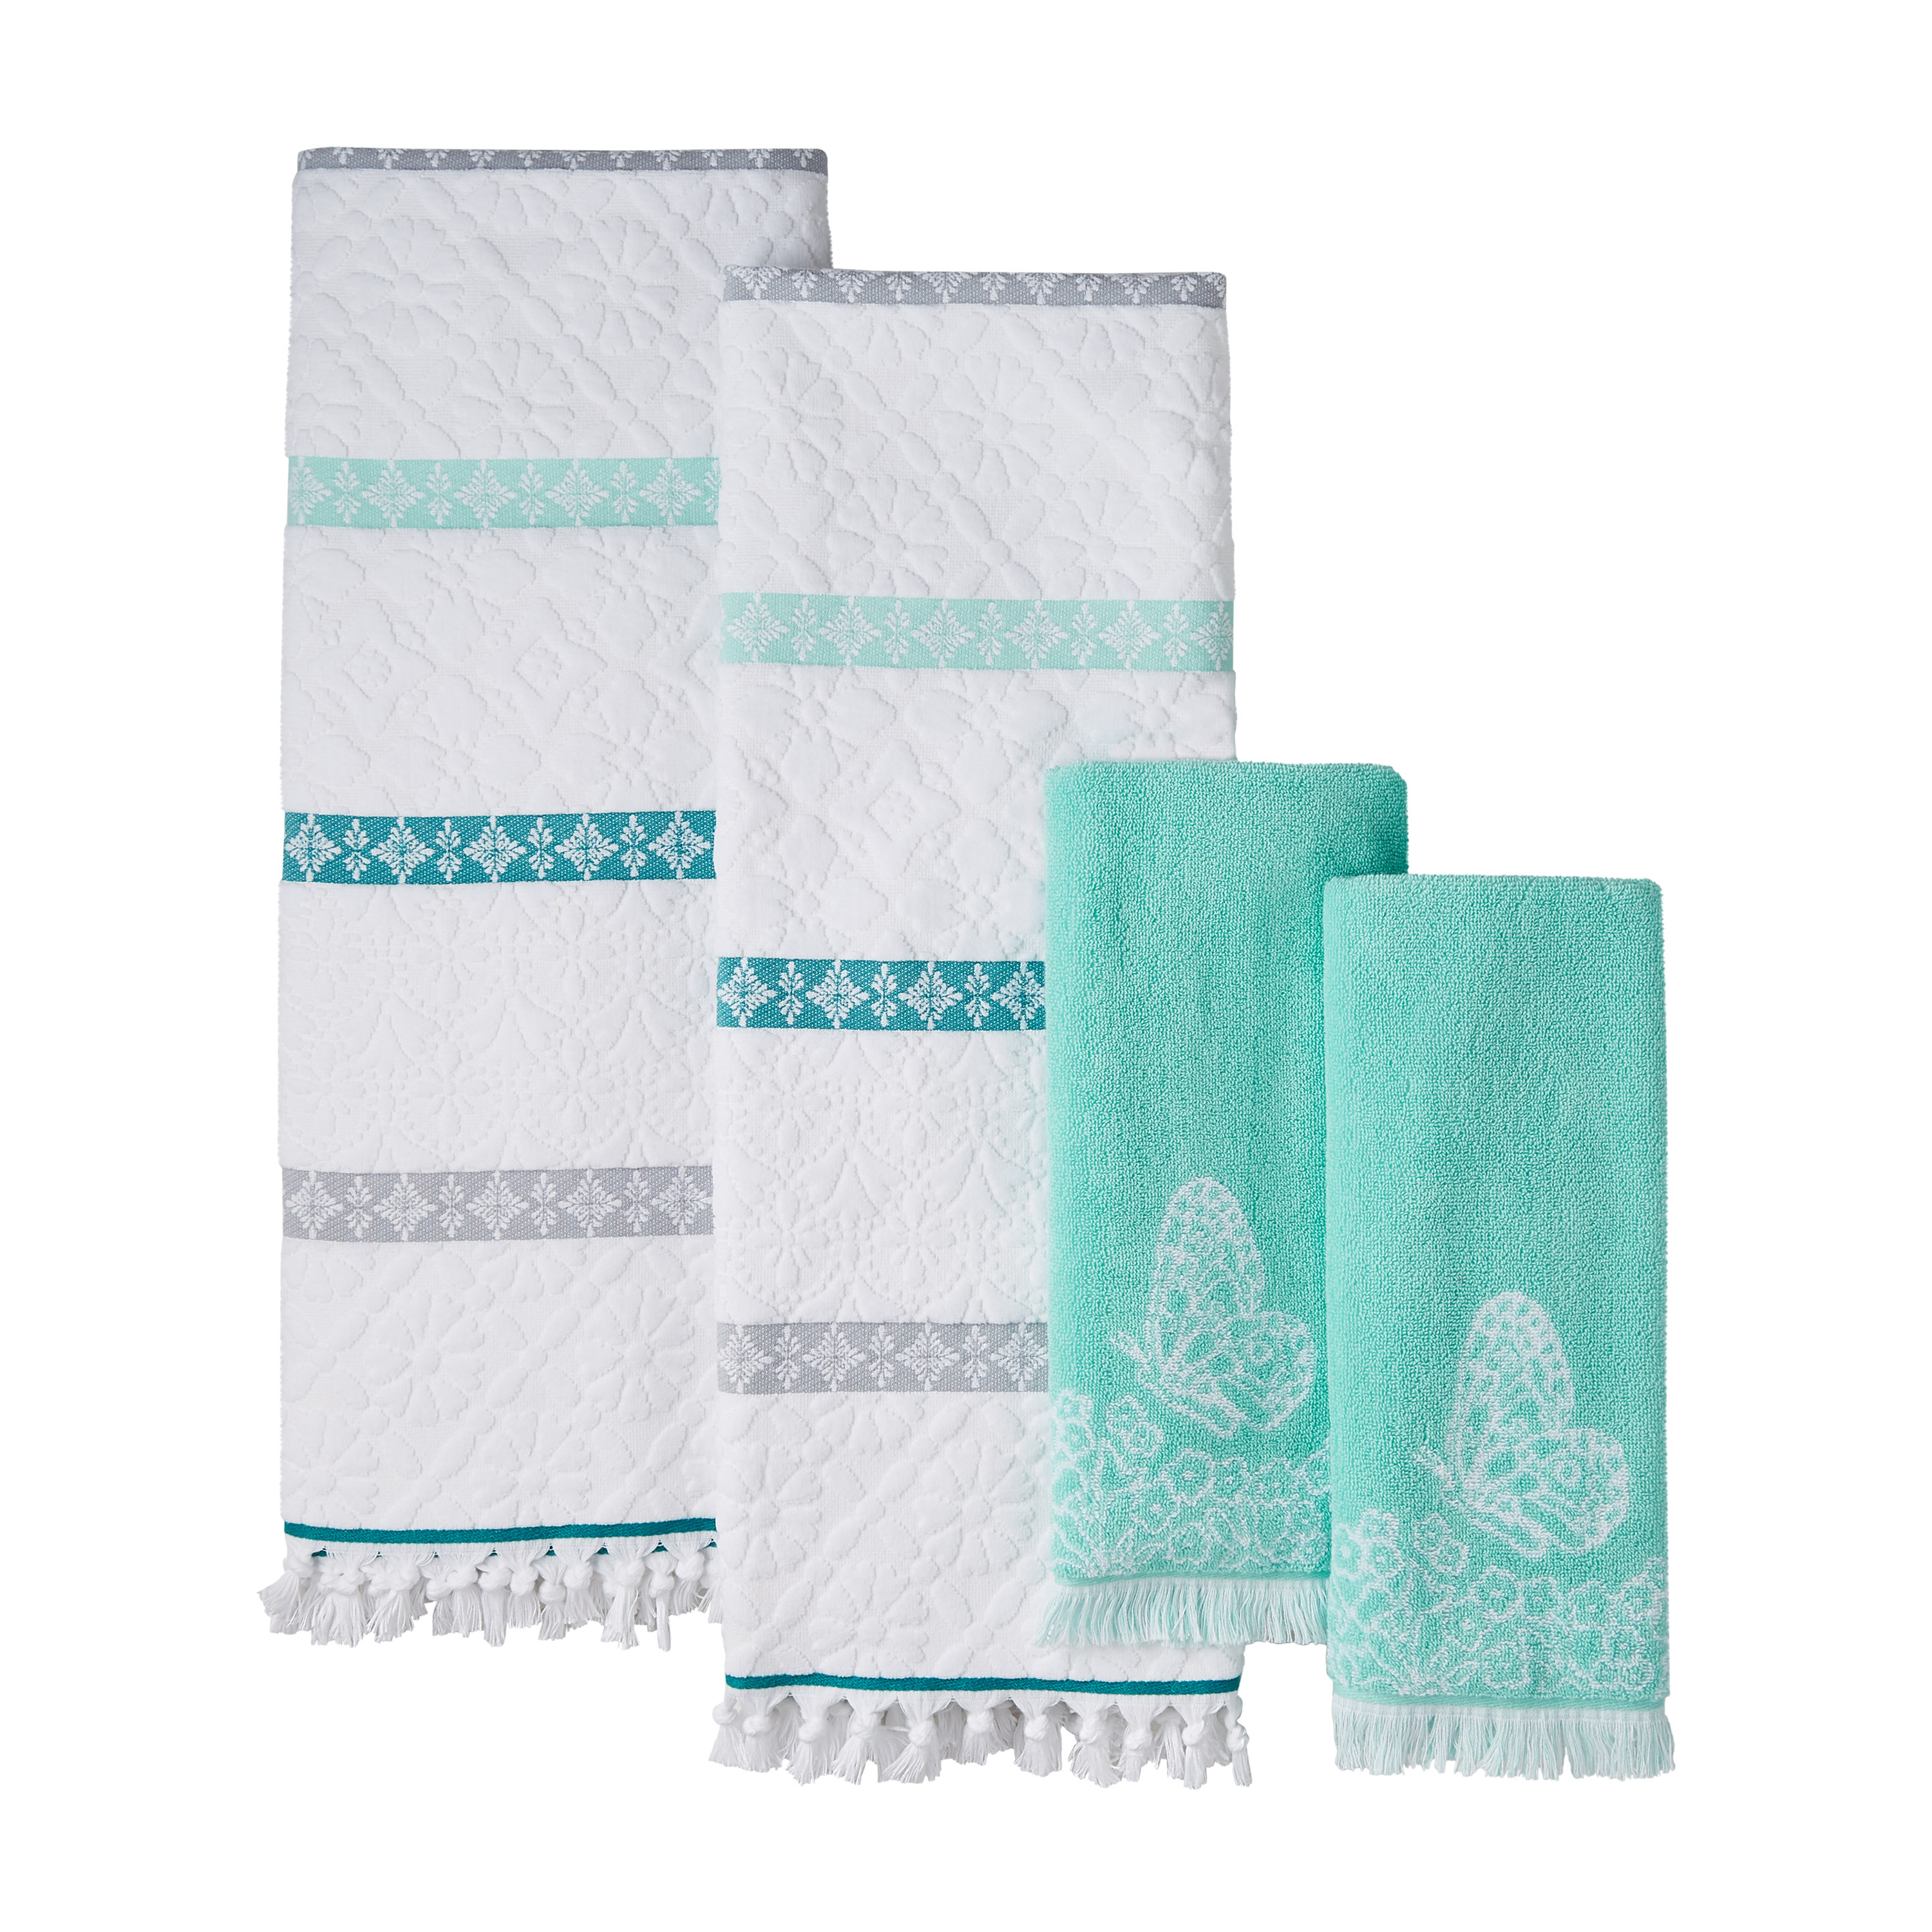 The Pioneer Woman 4 Piece Cotton Bath Towel Set, Soft Silver - image 3 of 5